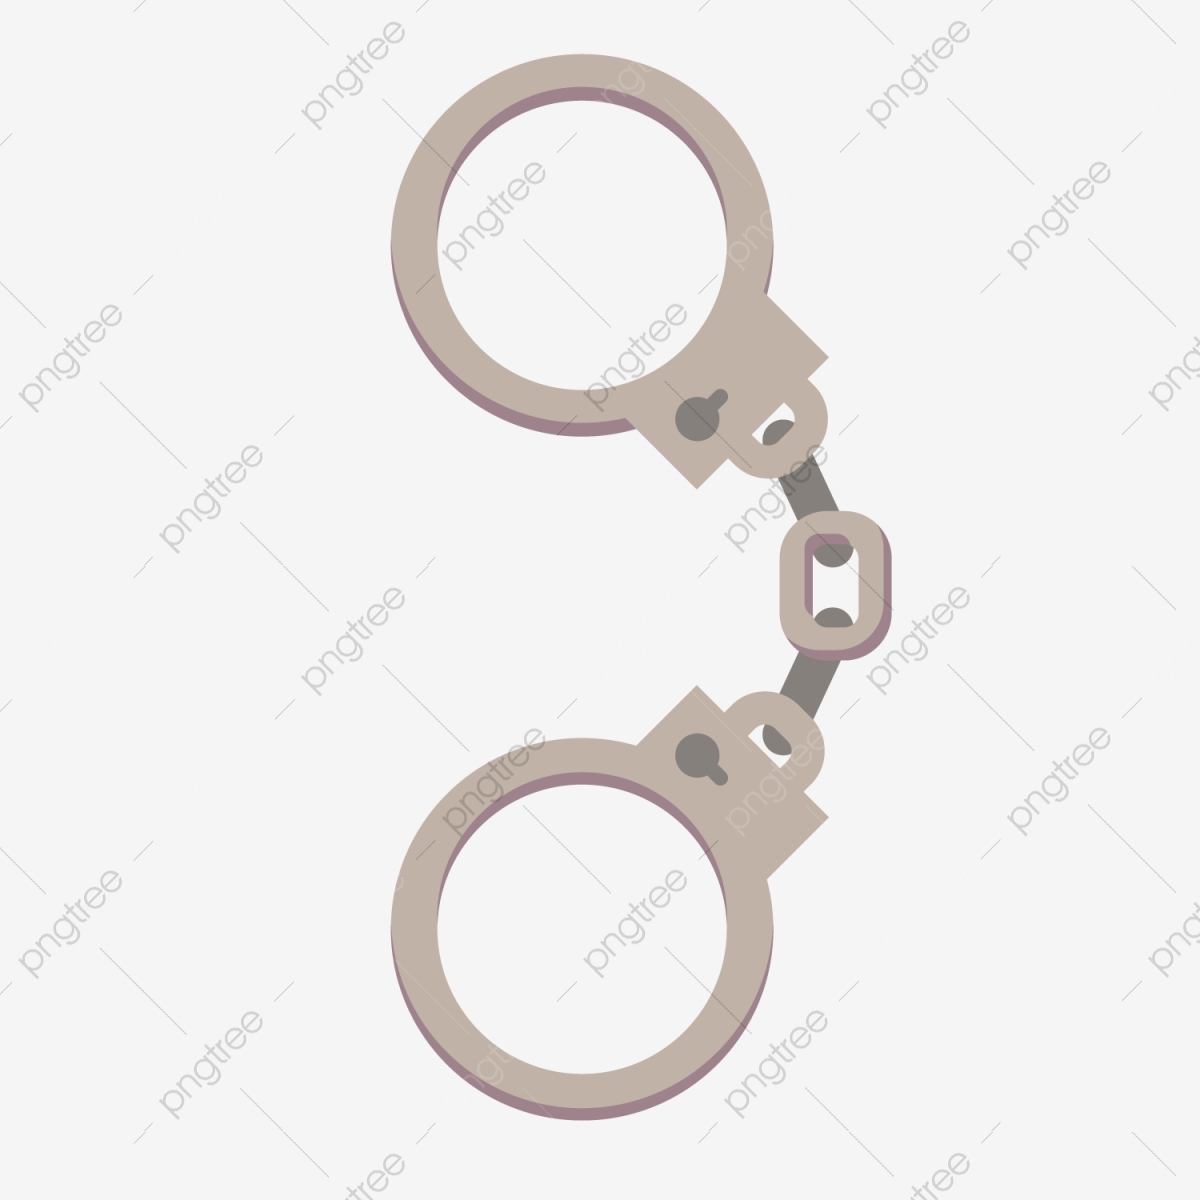 Hand painted . Handcuffs clipart shackles